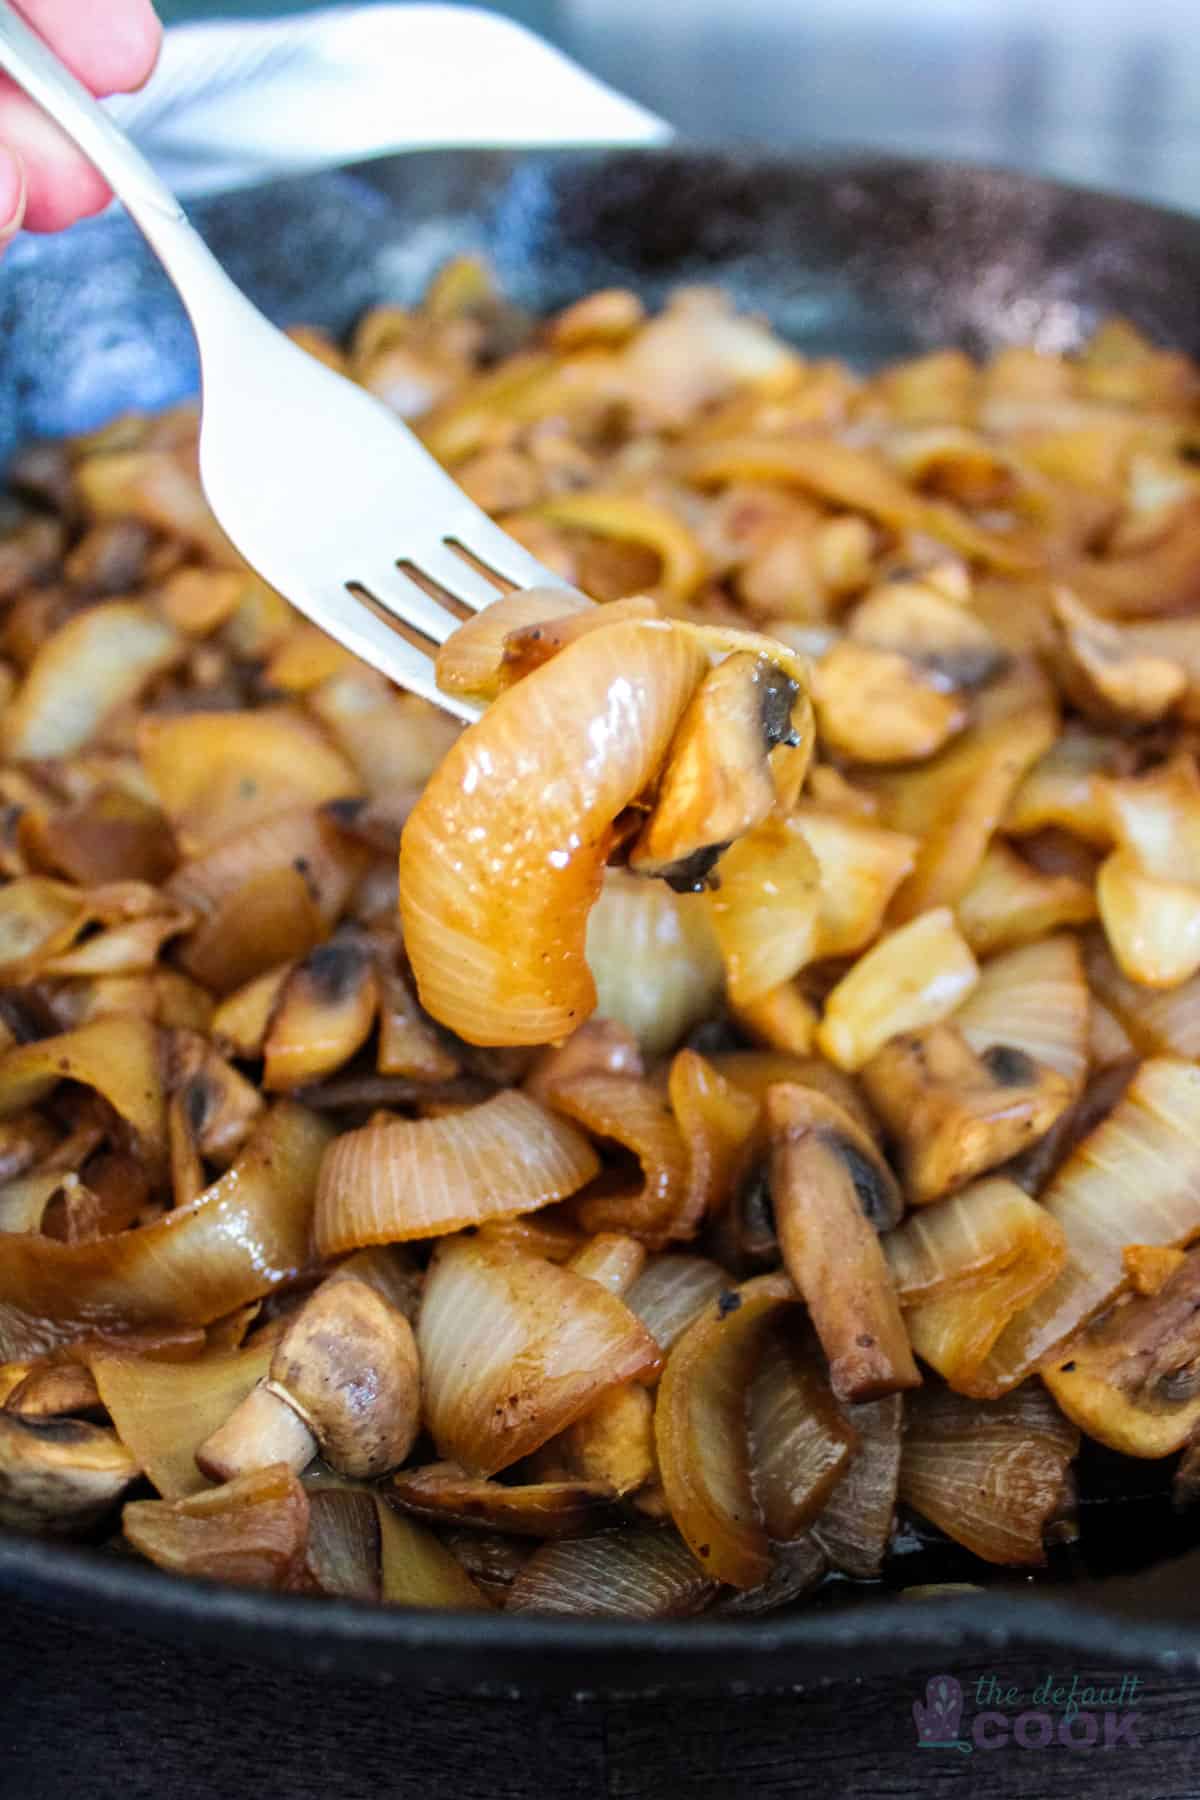 Caramelized onions and mushrooms in skillet with a fork holding a bite of them in front.